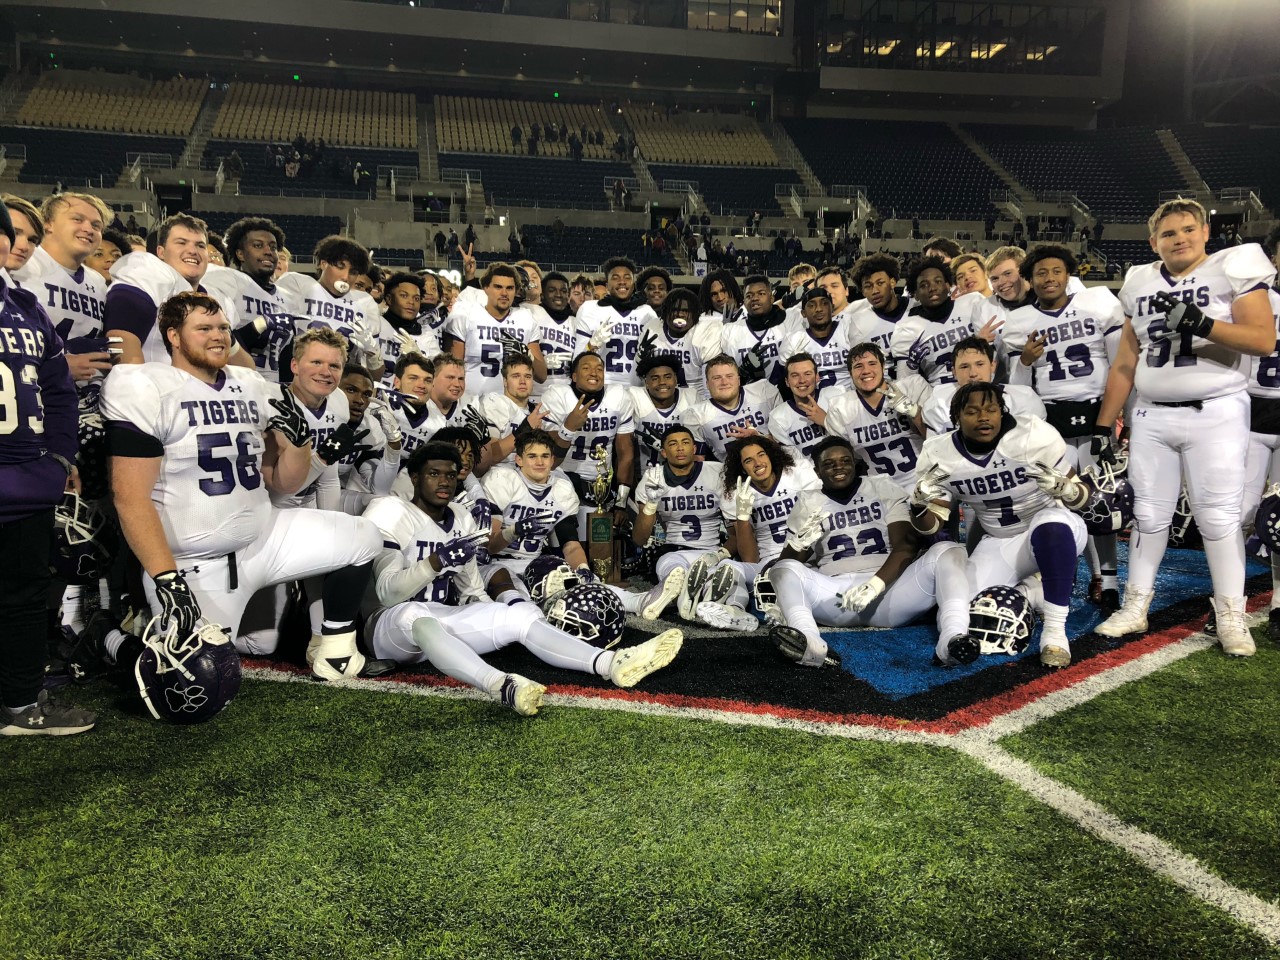 OHSAA > Sports & Tournaments > Football > Football - 2019 > 2019 OHSAA  Football State Playoffs Coverage > 2019 OHSAA Football State Championships  - Recaps